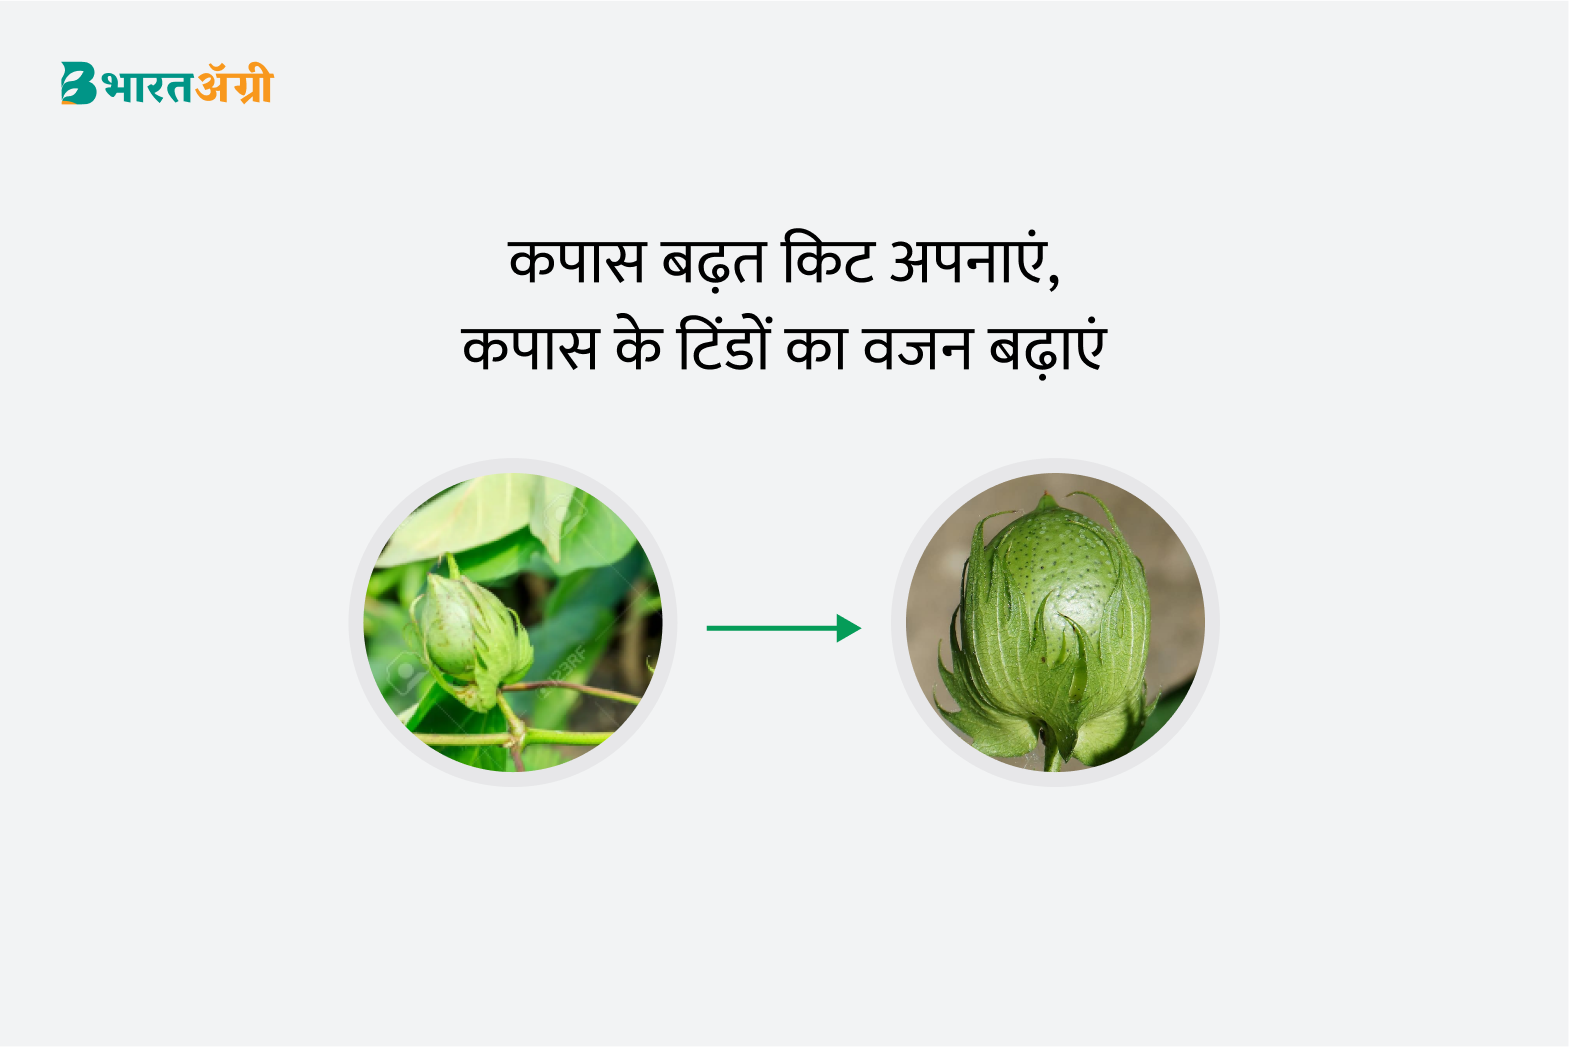 Cotton weight gain formula | कपास बढ़त किट | Buy Now and Get Discounts!